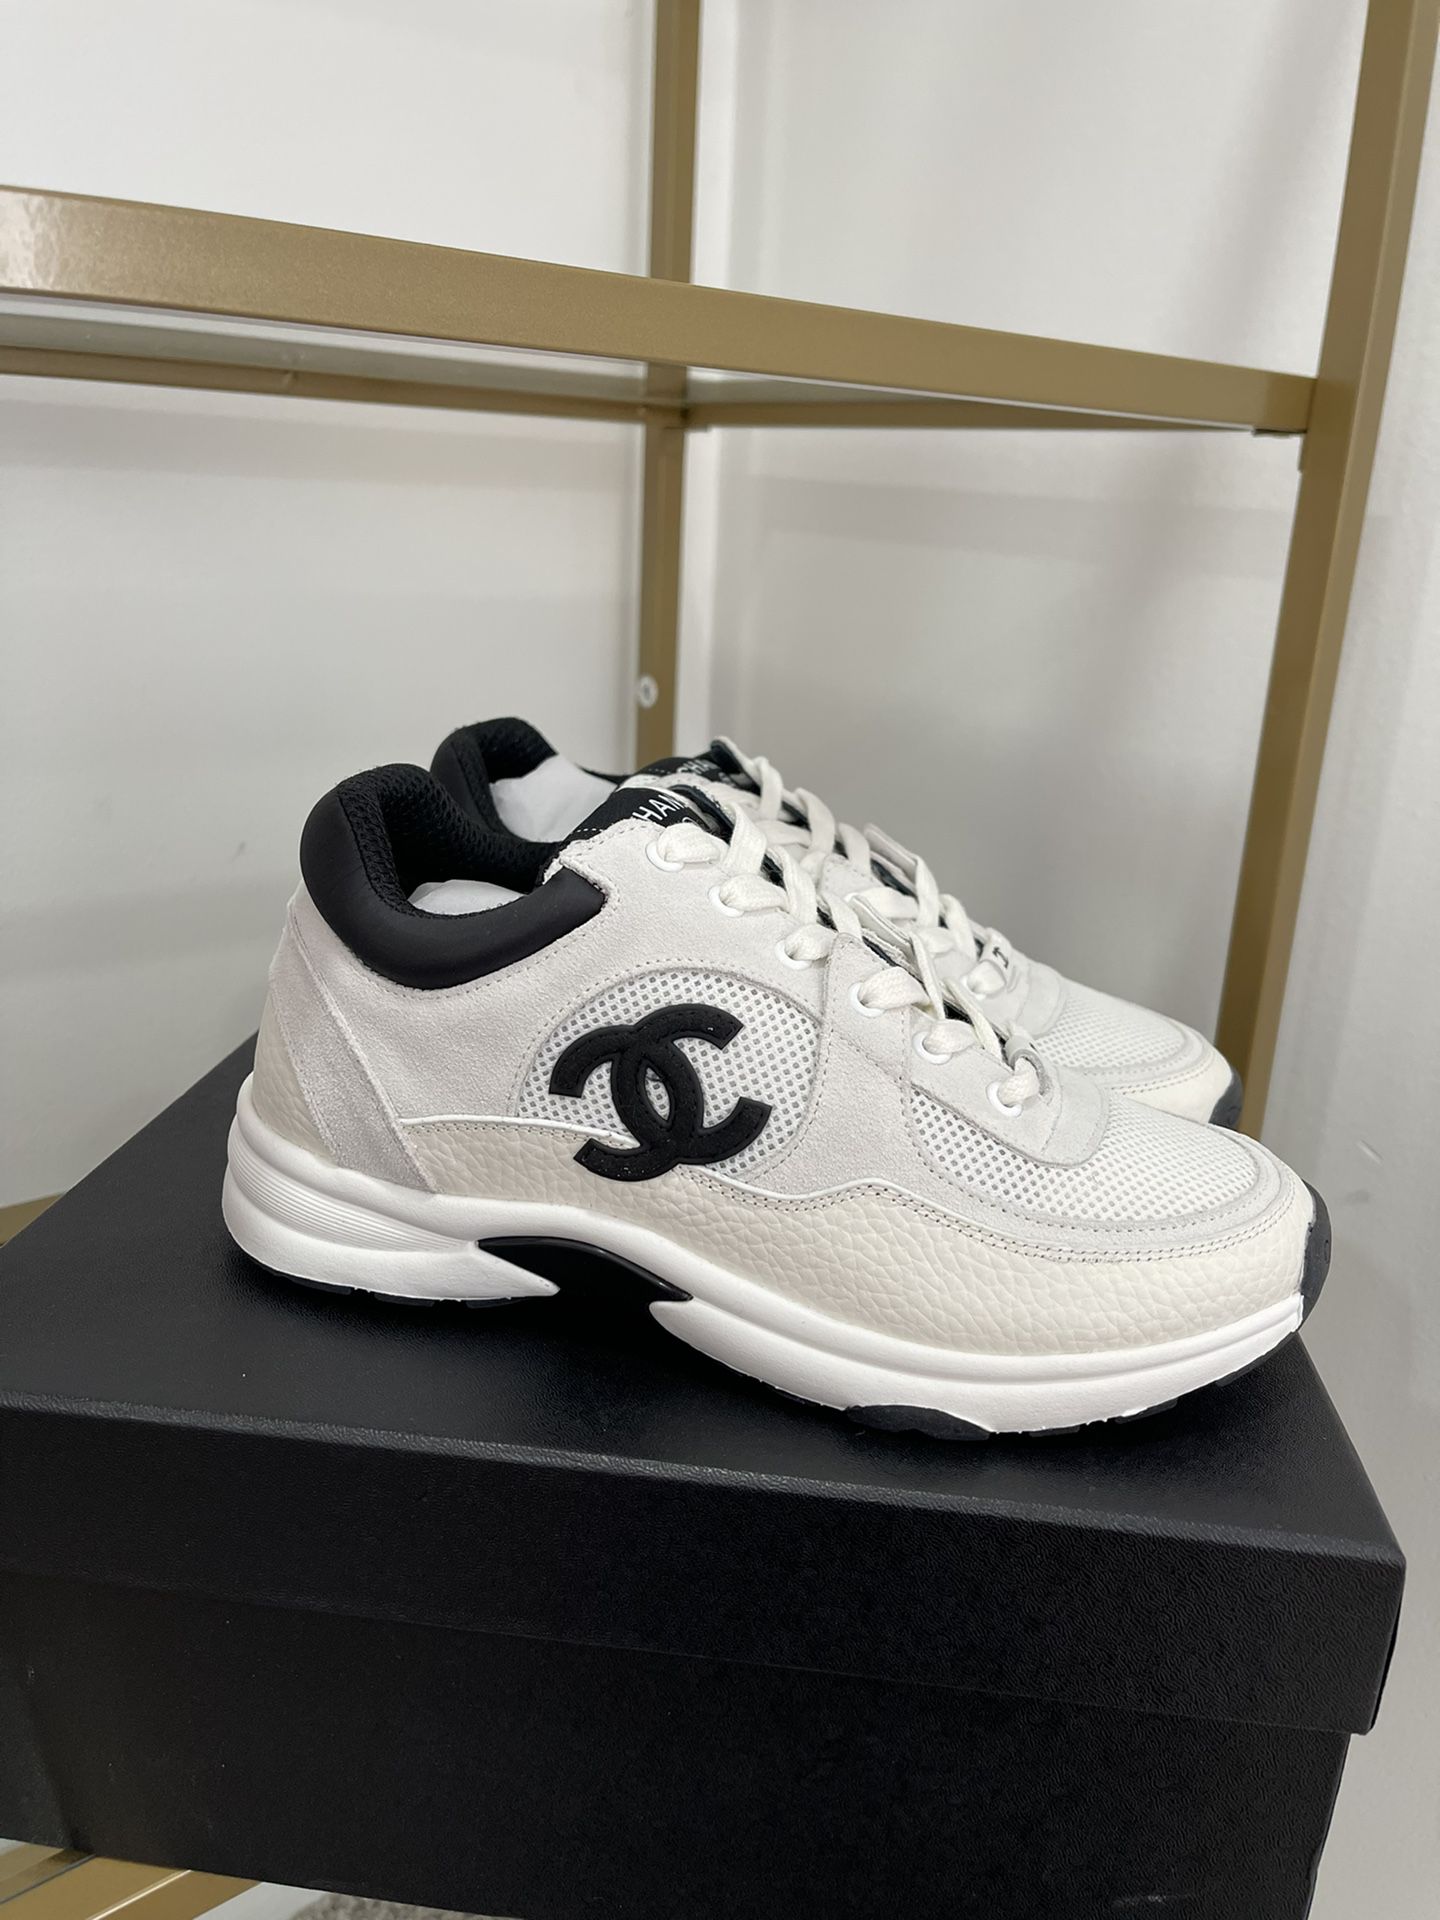 Chanel Sneakers- 7 & Hermes Oran Green for Sale in Katonah, NY - OfferUp